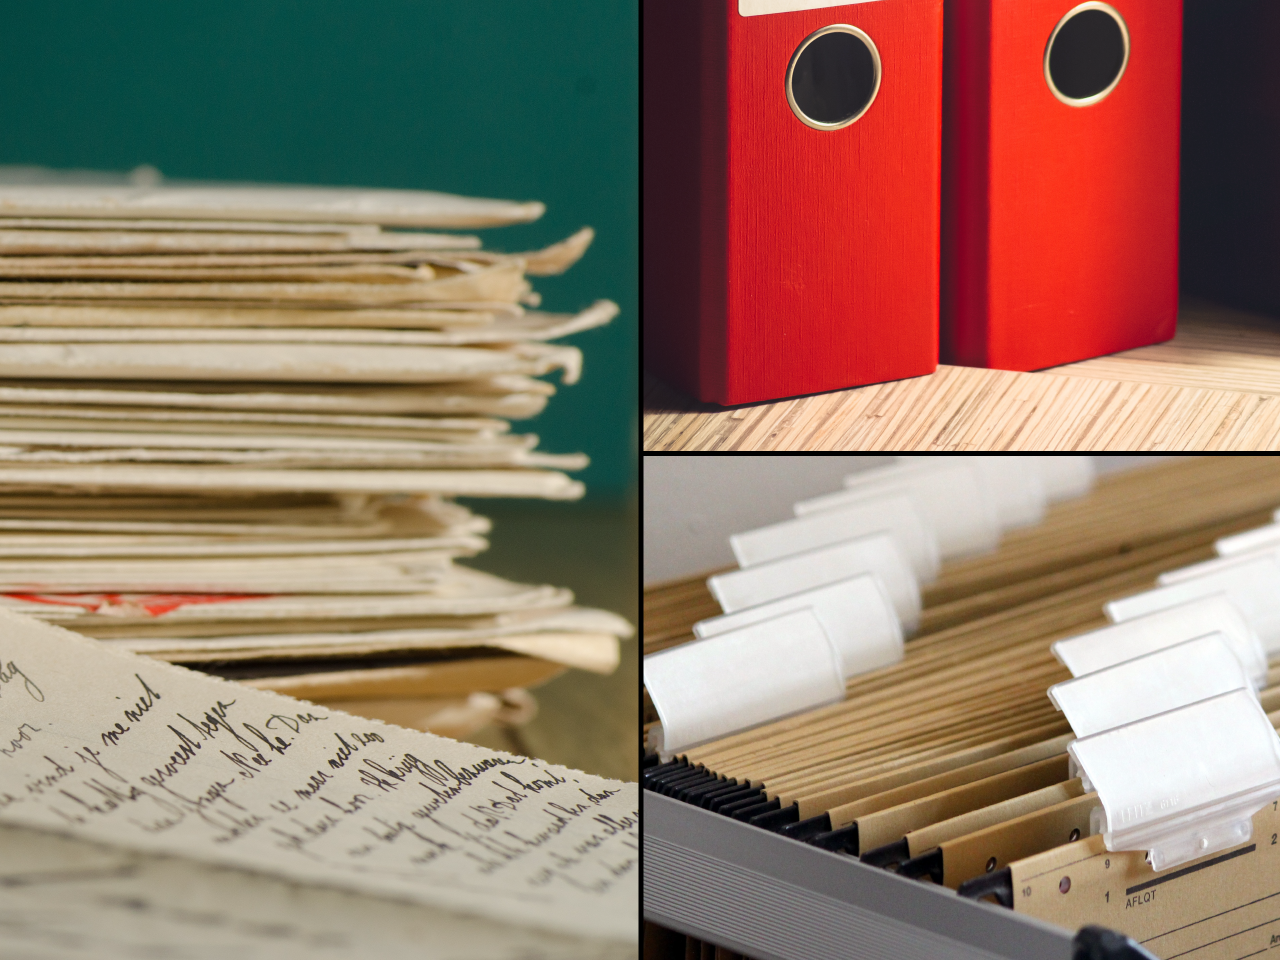 A collage of three images. The left image is the full height, and half the width of the final image. This image is a stack of papers, slightly yellowed with age. In the foreground is a single page with cursive handwriting on it. The top right image is a picture of two red arch-levers folders that are closed with their spines facing the camera. The bottom image is a filing cabinet drawer that is filled with tabbed folders. Each label is blank. The folders are a cream colour.